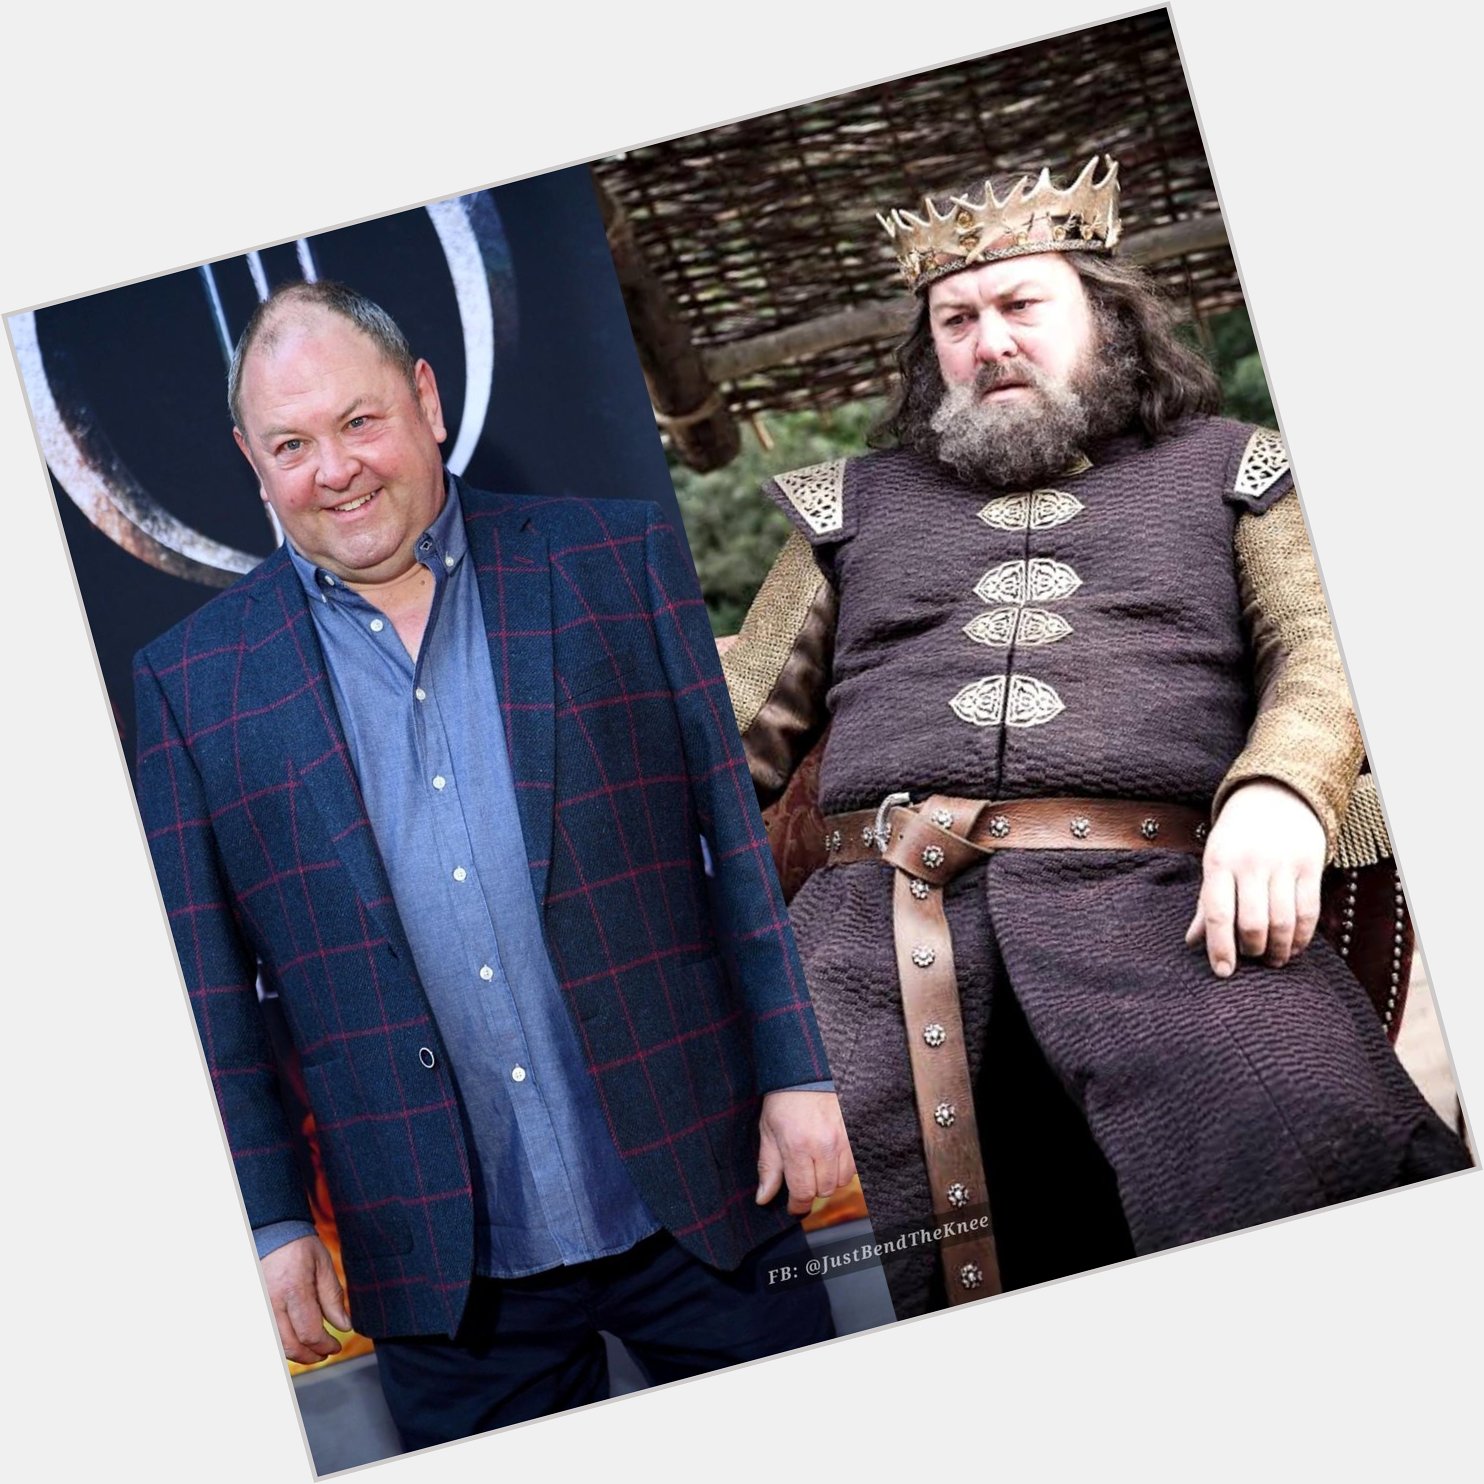 Happy 59th birthday to Mark Addy our King Robert 